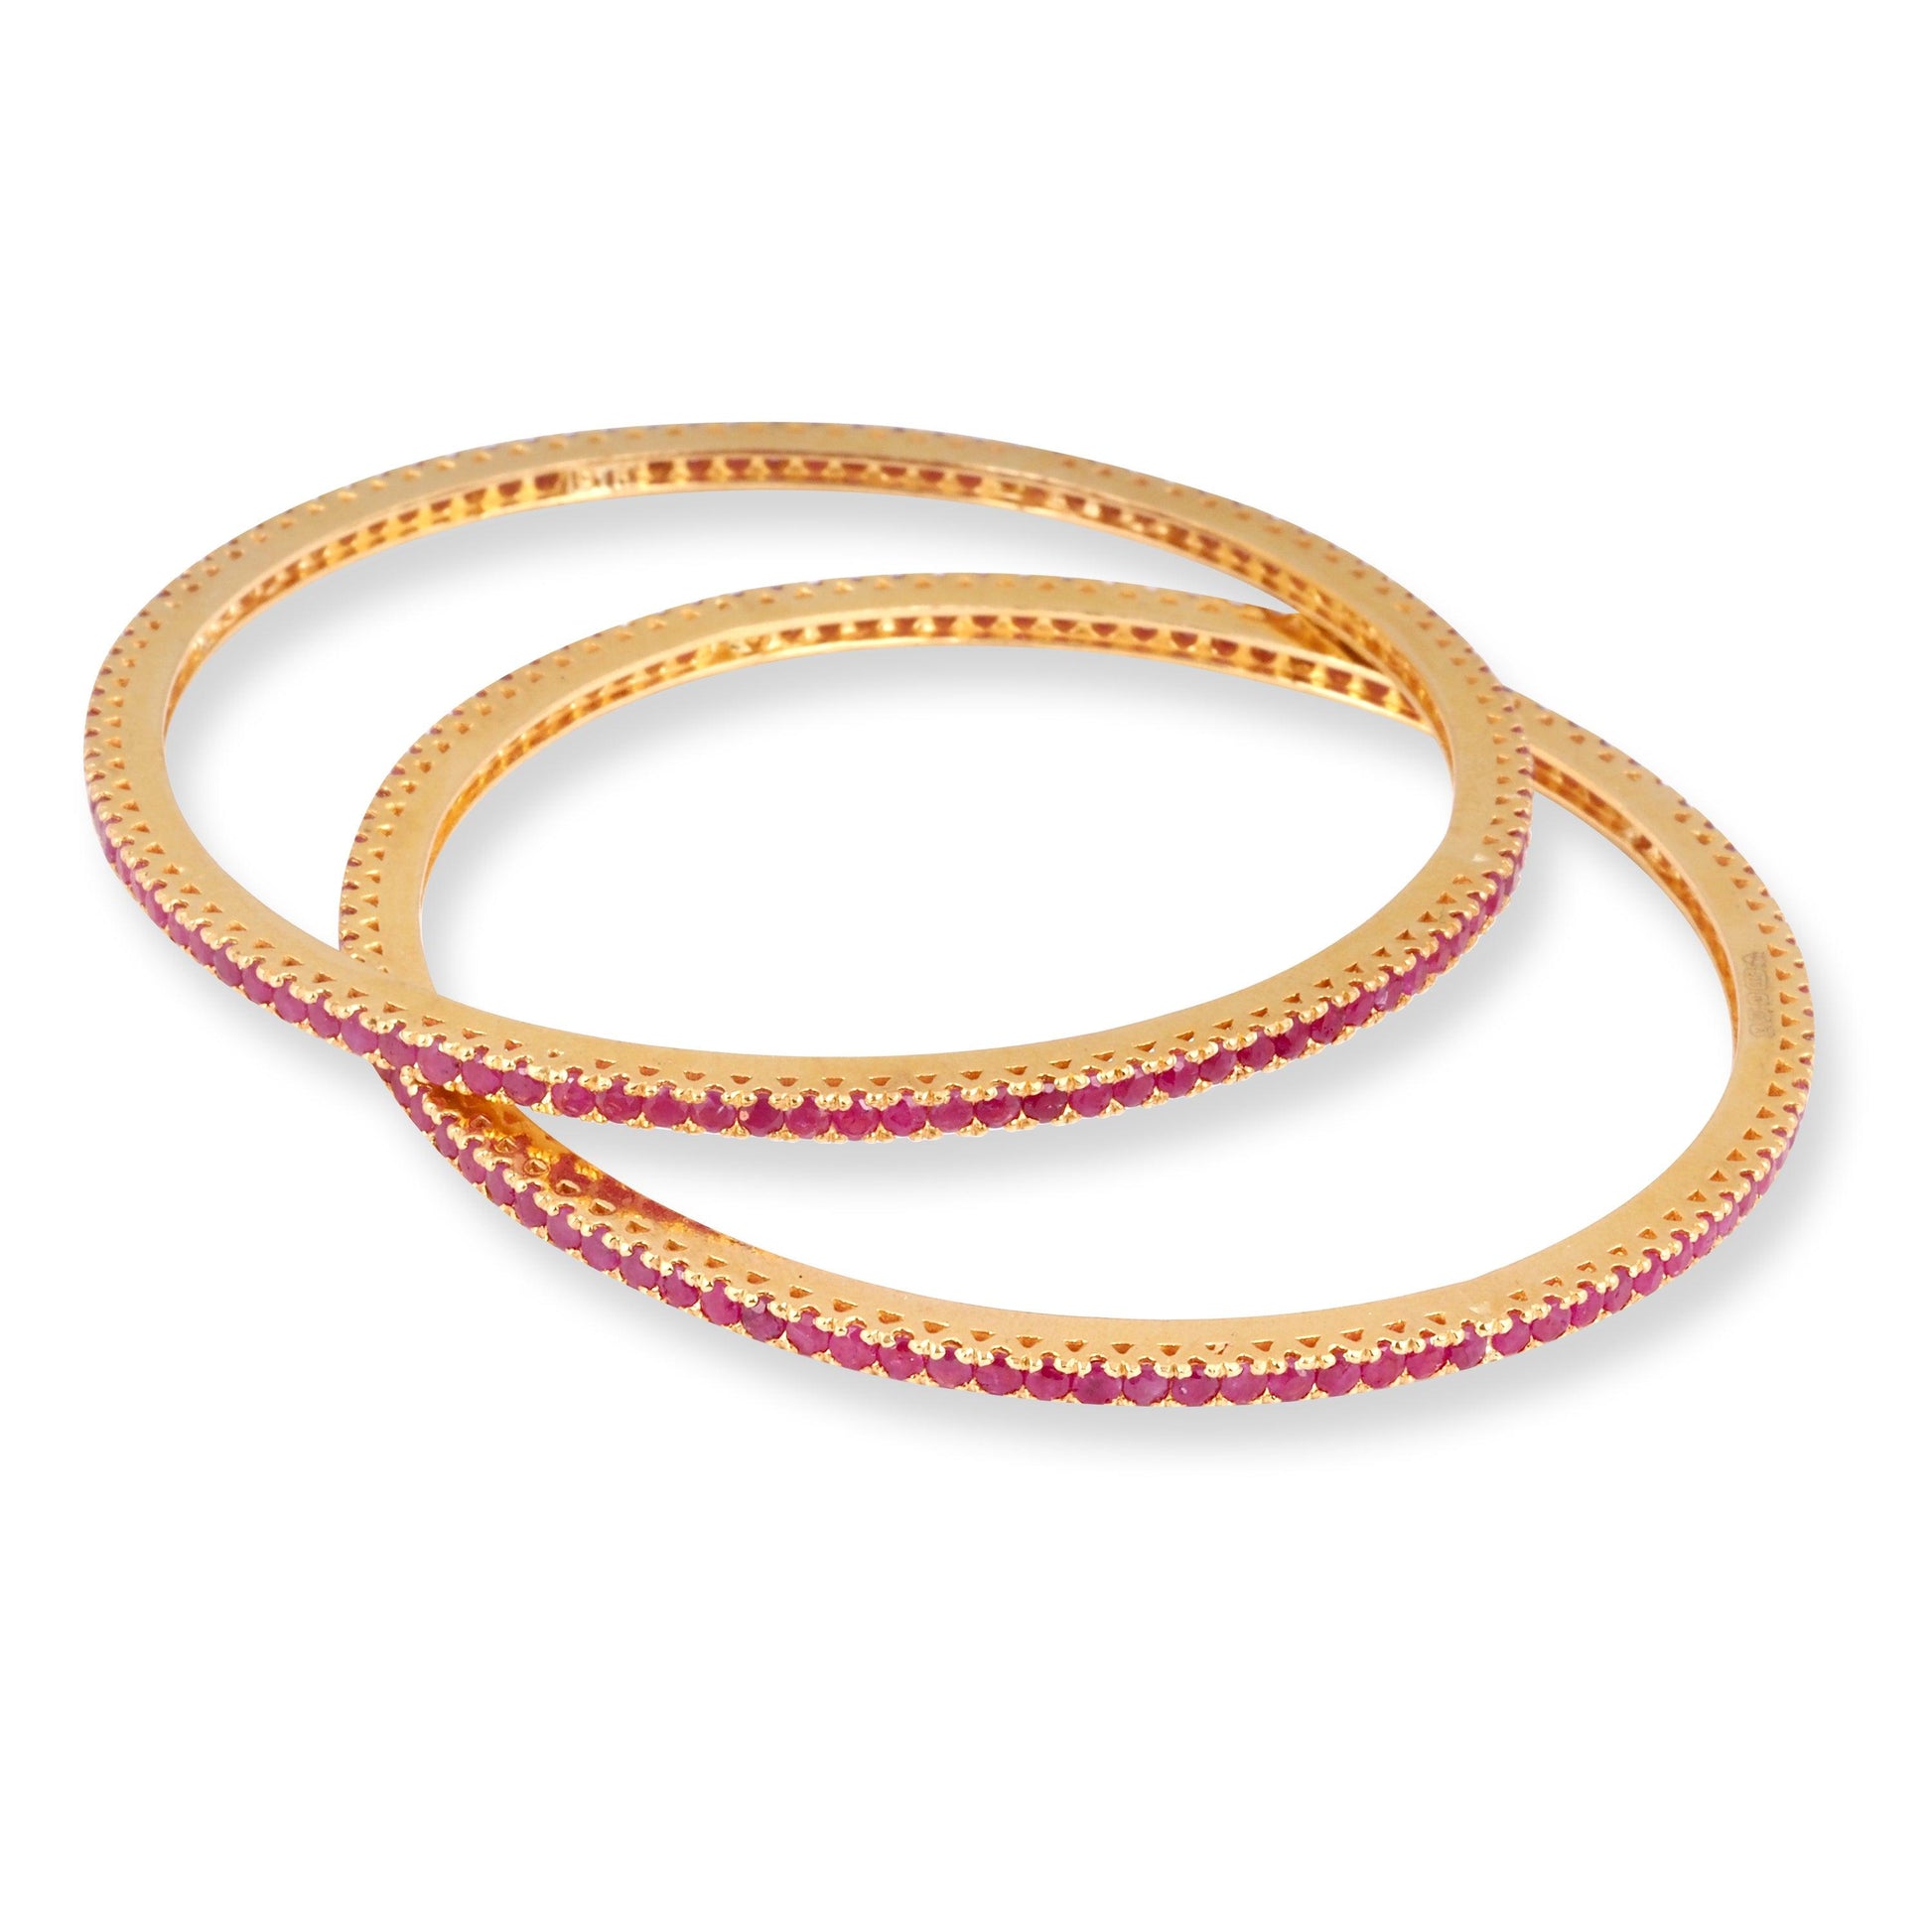 Pair of 22ct Gold Bangles with Pink Stones B-8562 - Minar Jewellers